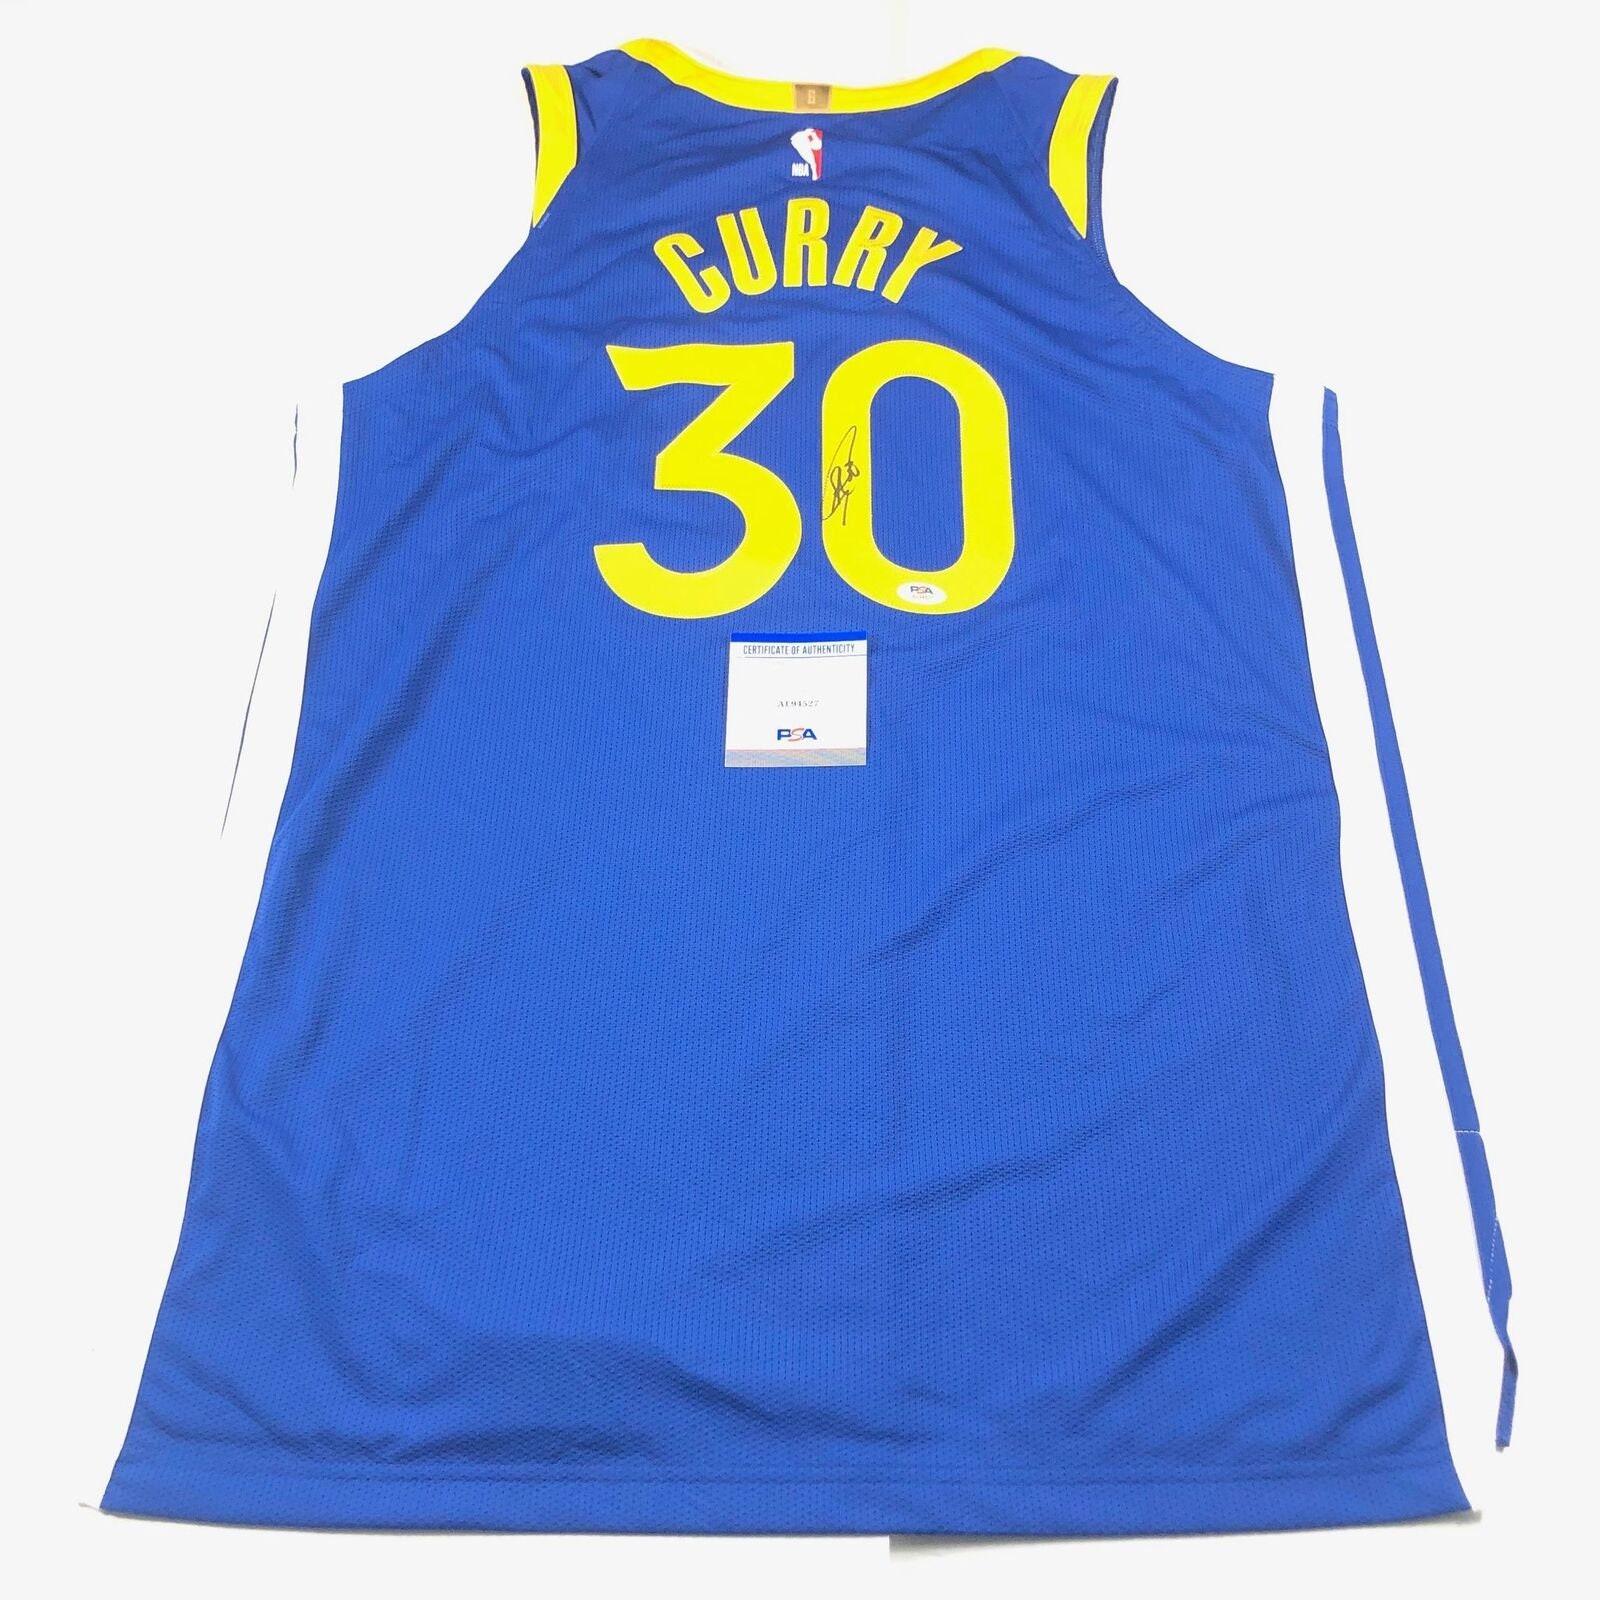 Stephen Curry Signed Autographed Golden State Warriors Replica Jersey  Psa/Dna 